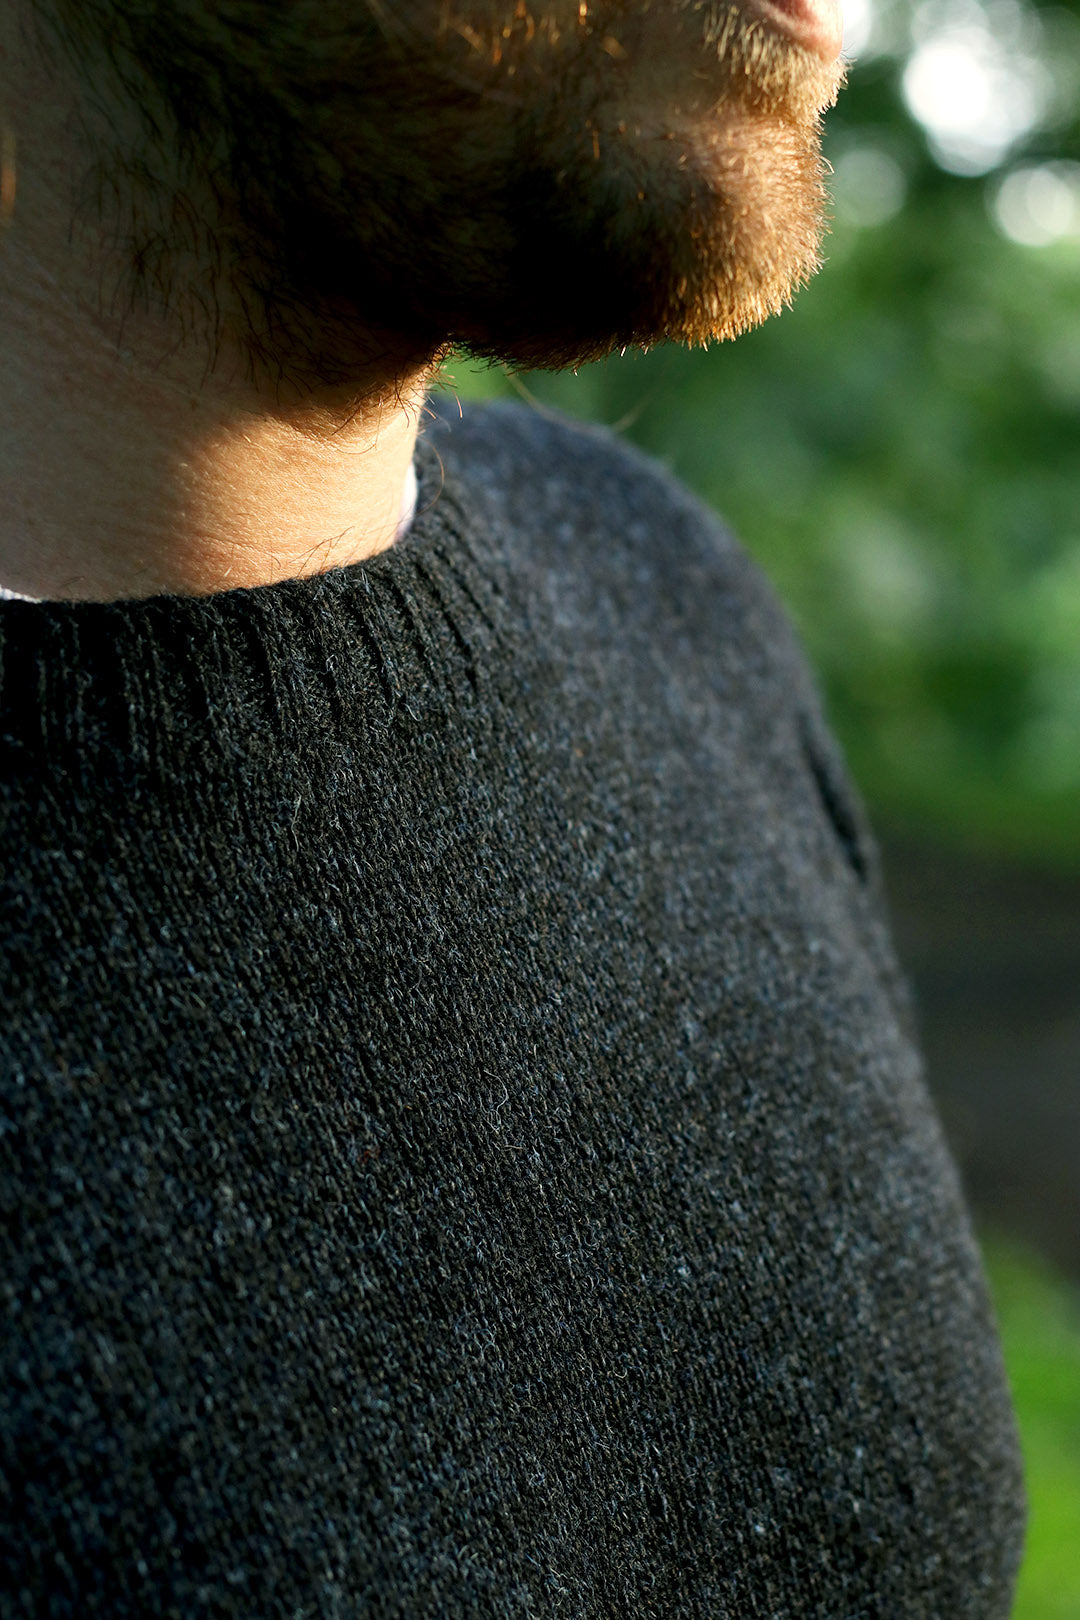 Made from authentic Shetland sheep wool from Jamieson's of Shetland, this beautifully knitted crew neck jumper comes in a black navy marl, giving it a beautiful textured feel. Exclusive to the Scottish Textiles Showcase.